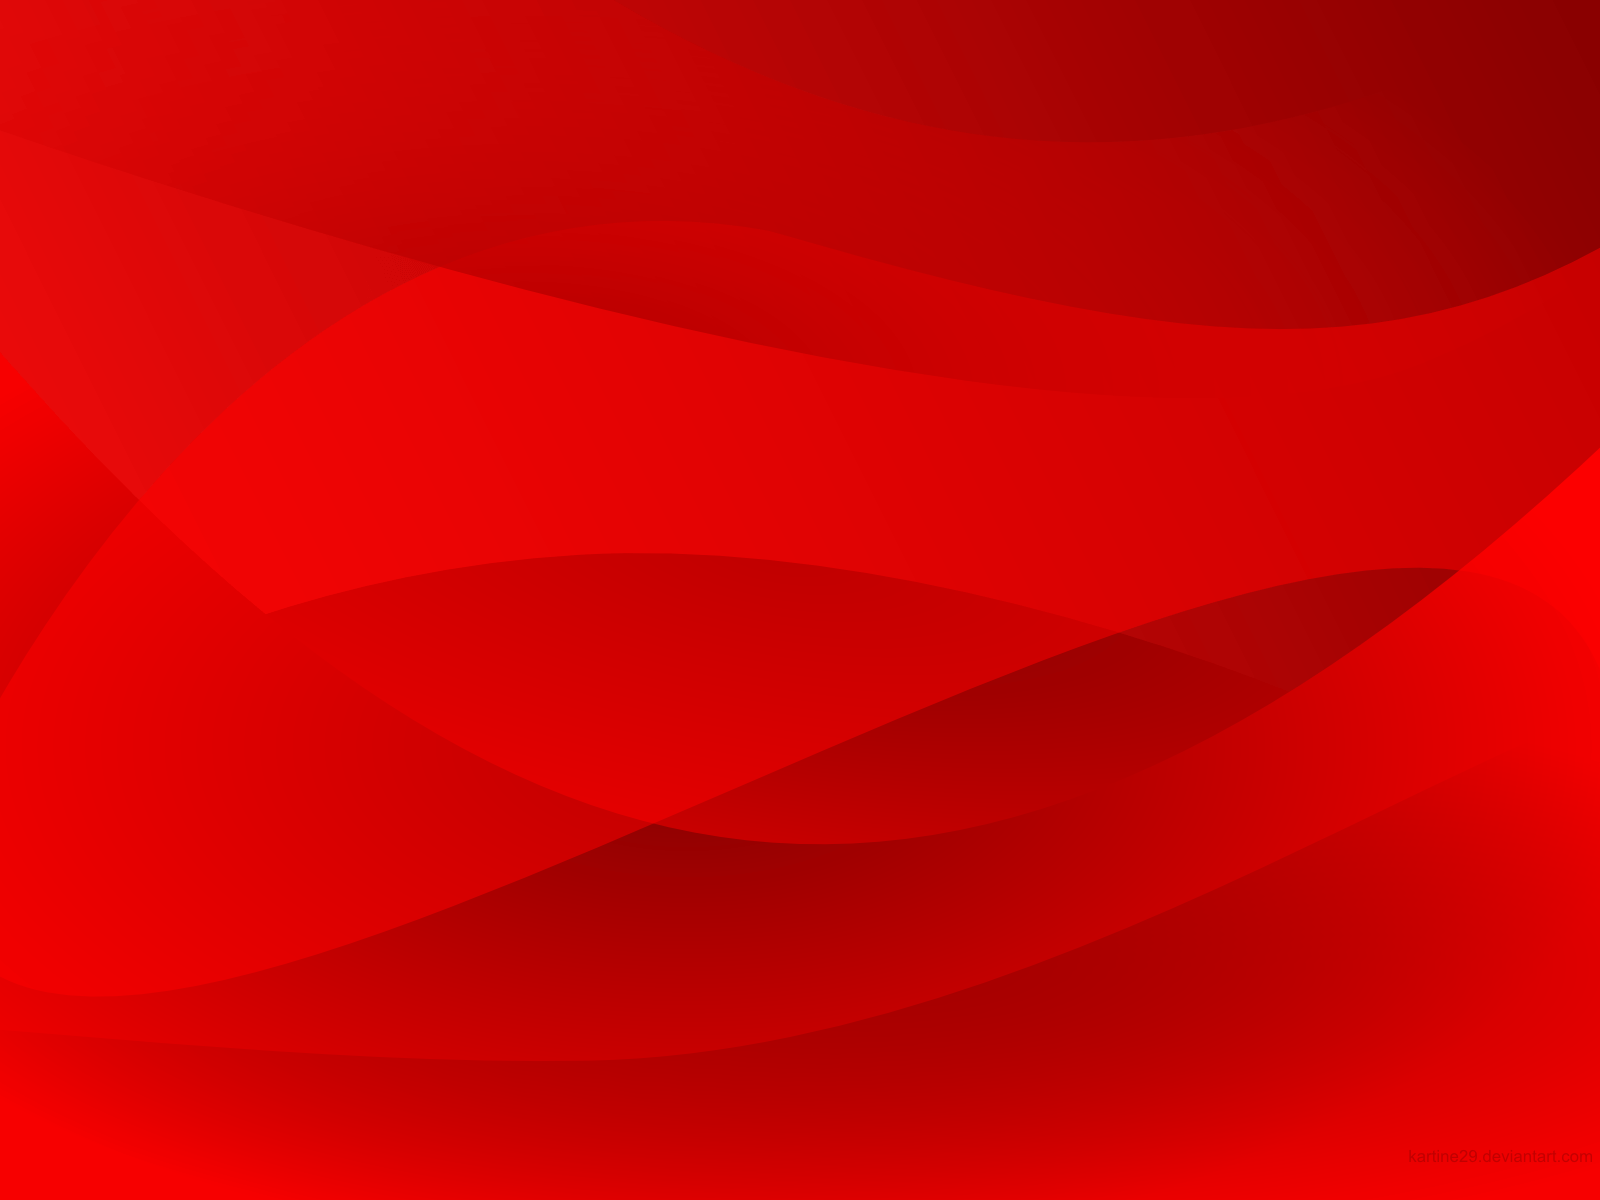 Red Colour Background Images - Wallpaper Cave